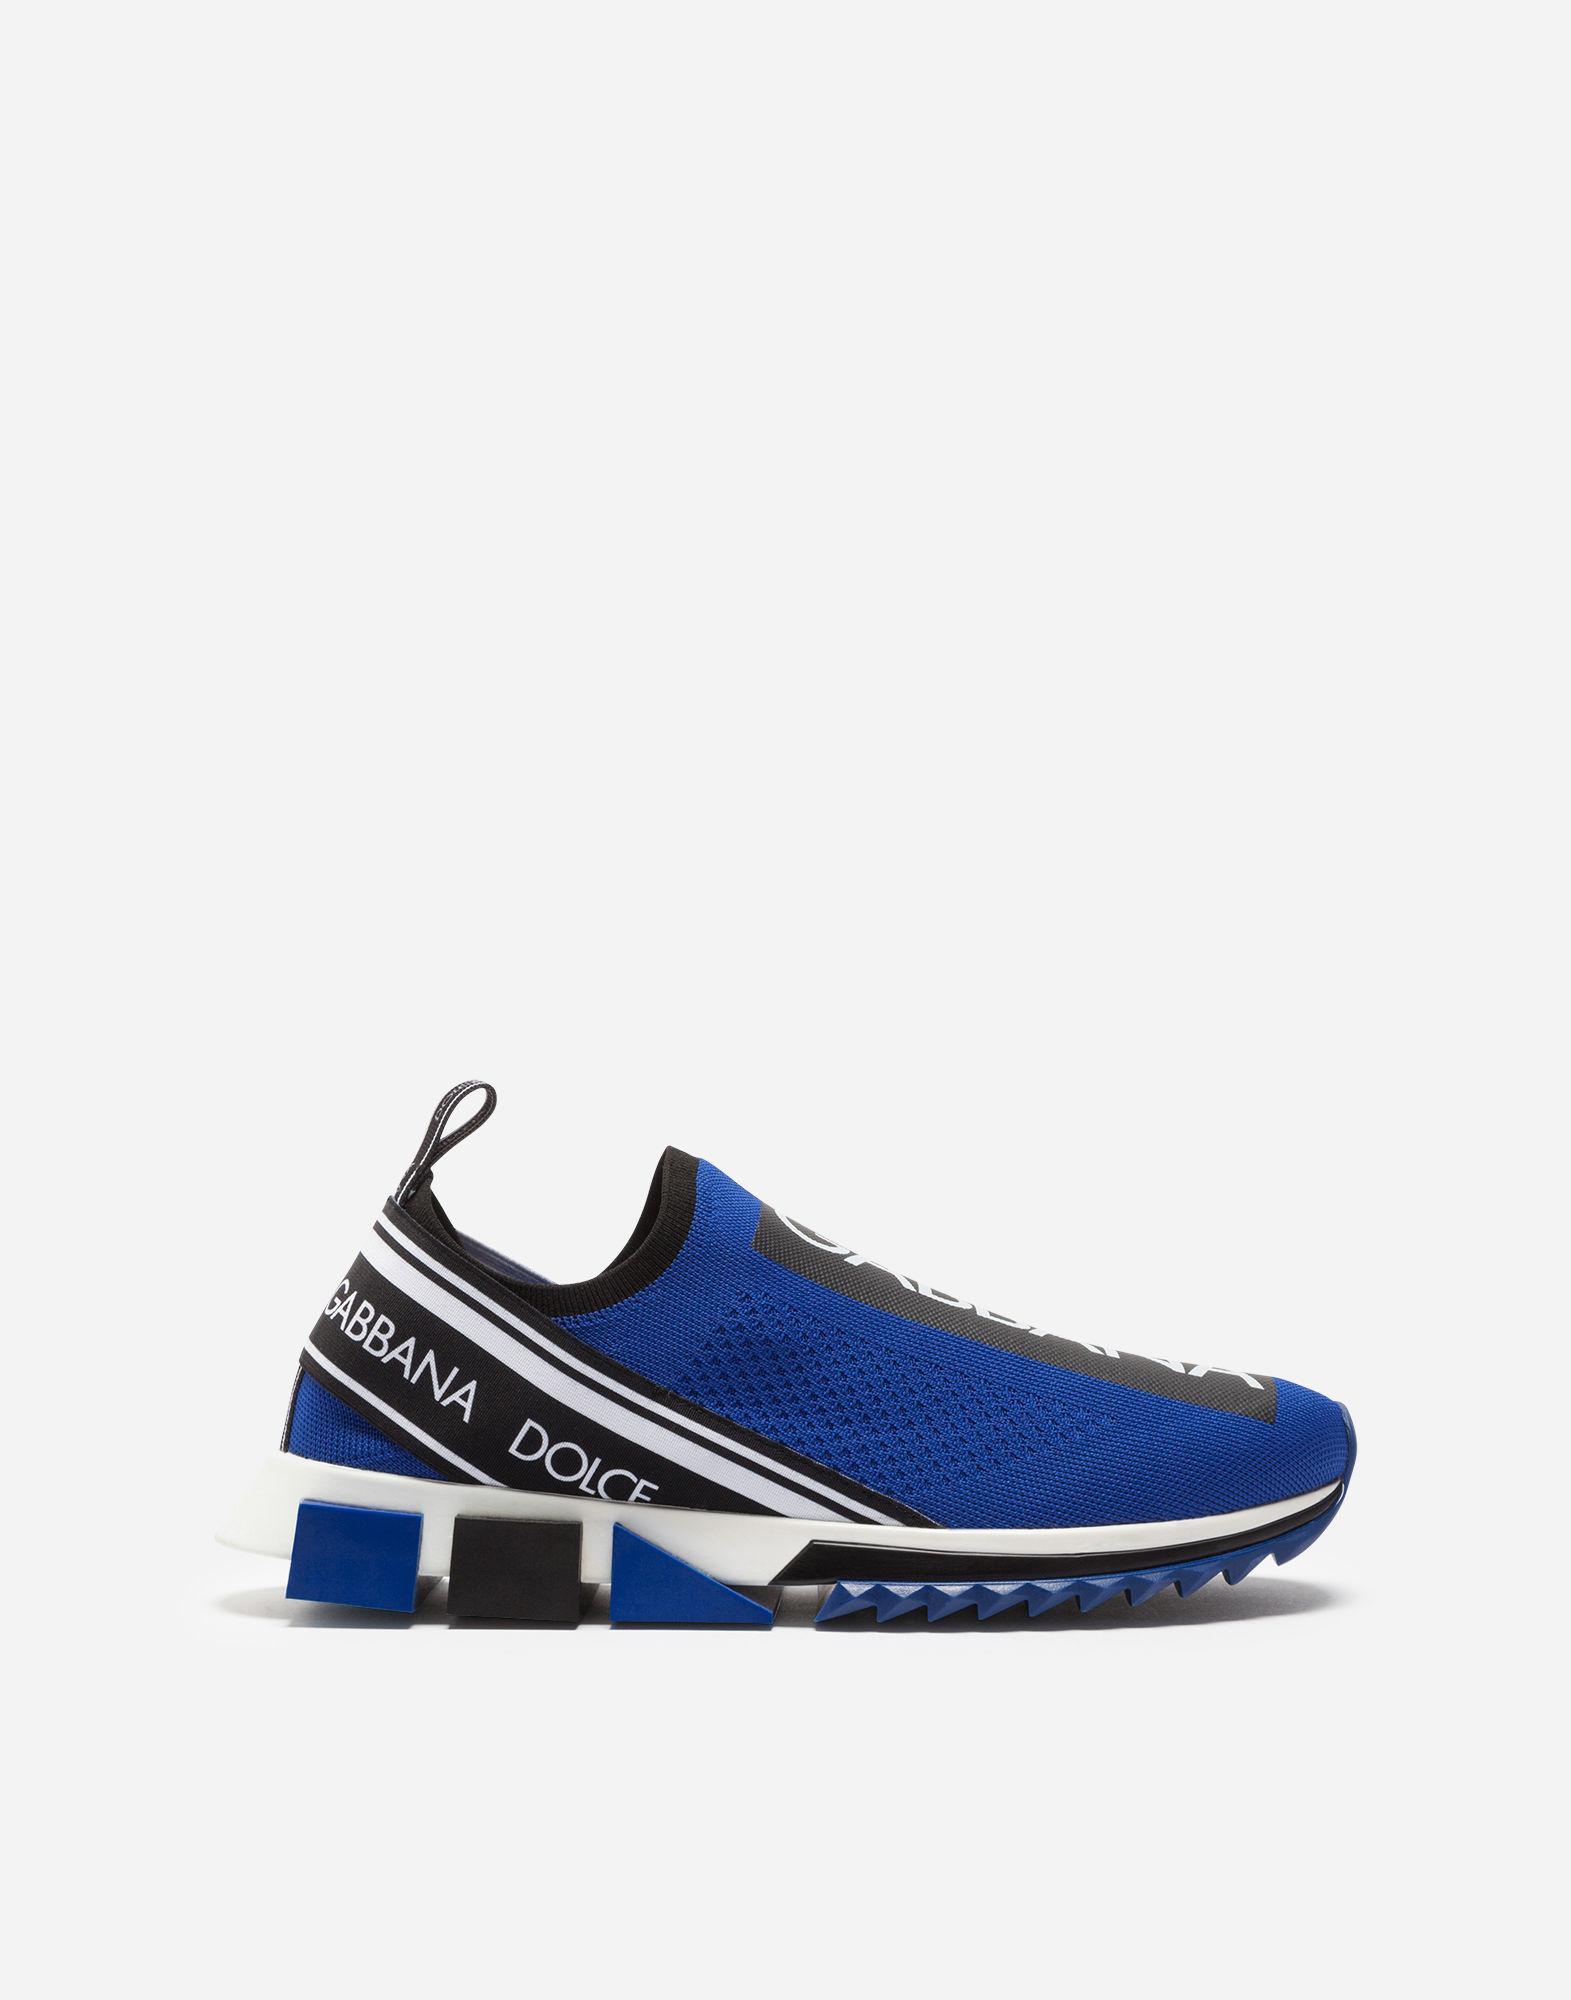 Dolce & Gabbana Synthetic Branded Sorrento Sneakers in Blue for Men - Lyst